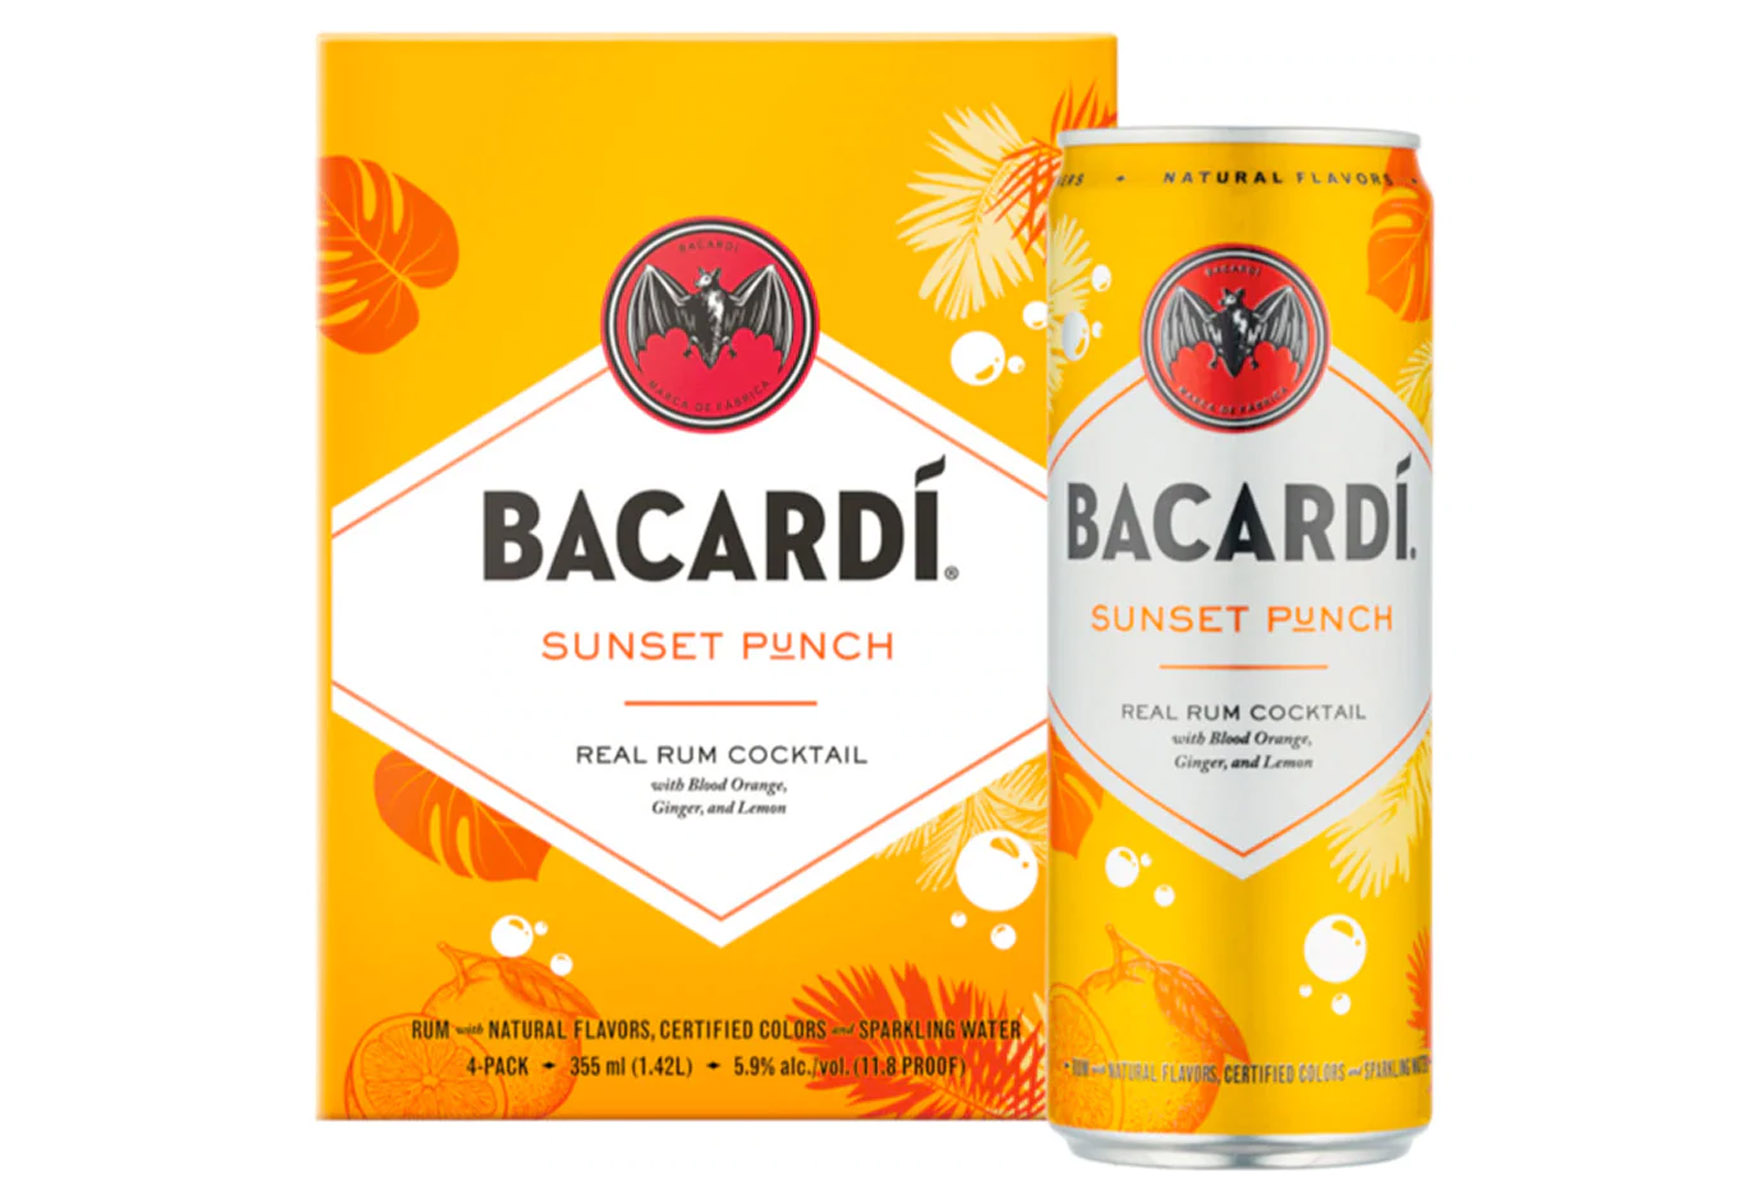 20-bacardi-sunset-punch-nutrition-facts